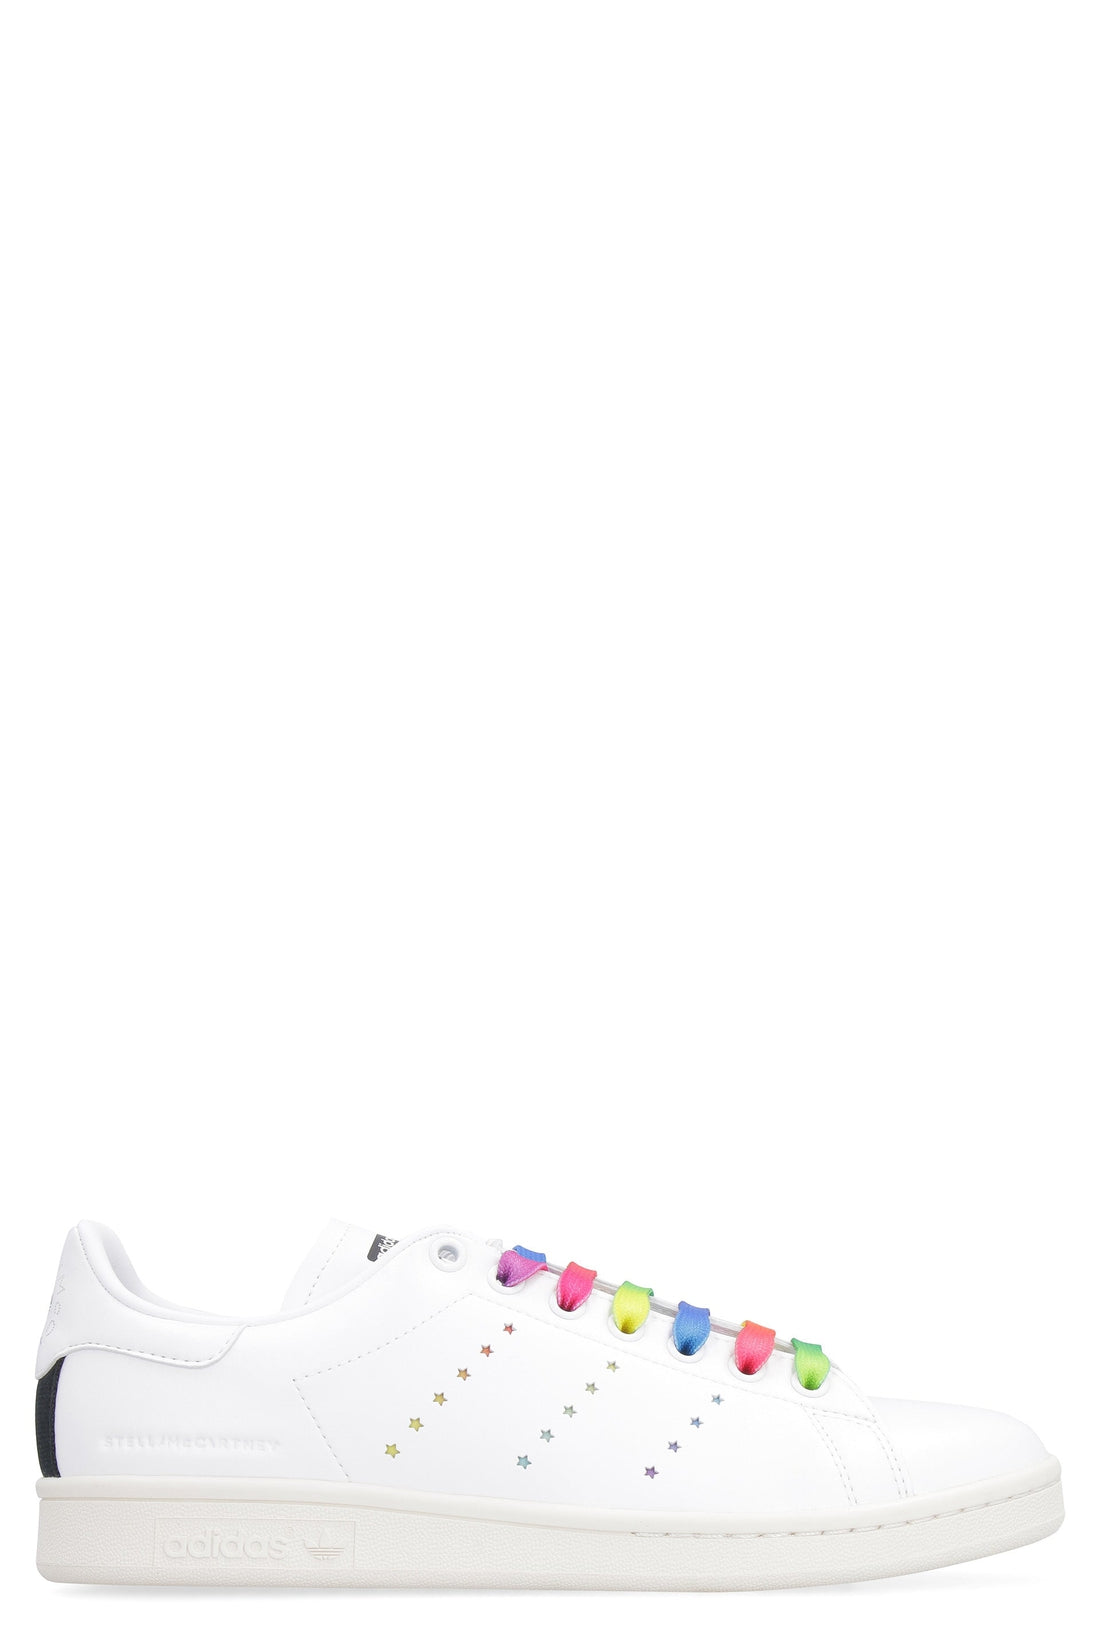 Stella McCartney-OUTLET-SALE-Stan Smith Adidas by Stella McCartney sneakers-ARCHIVIST